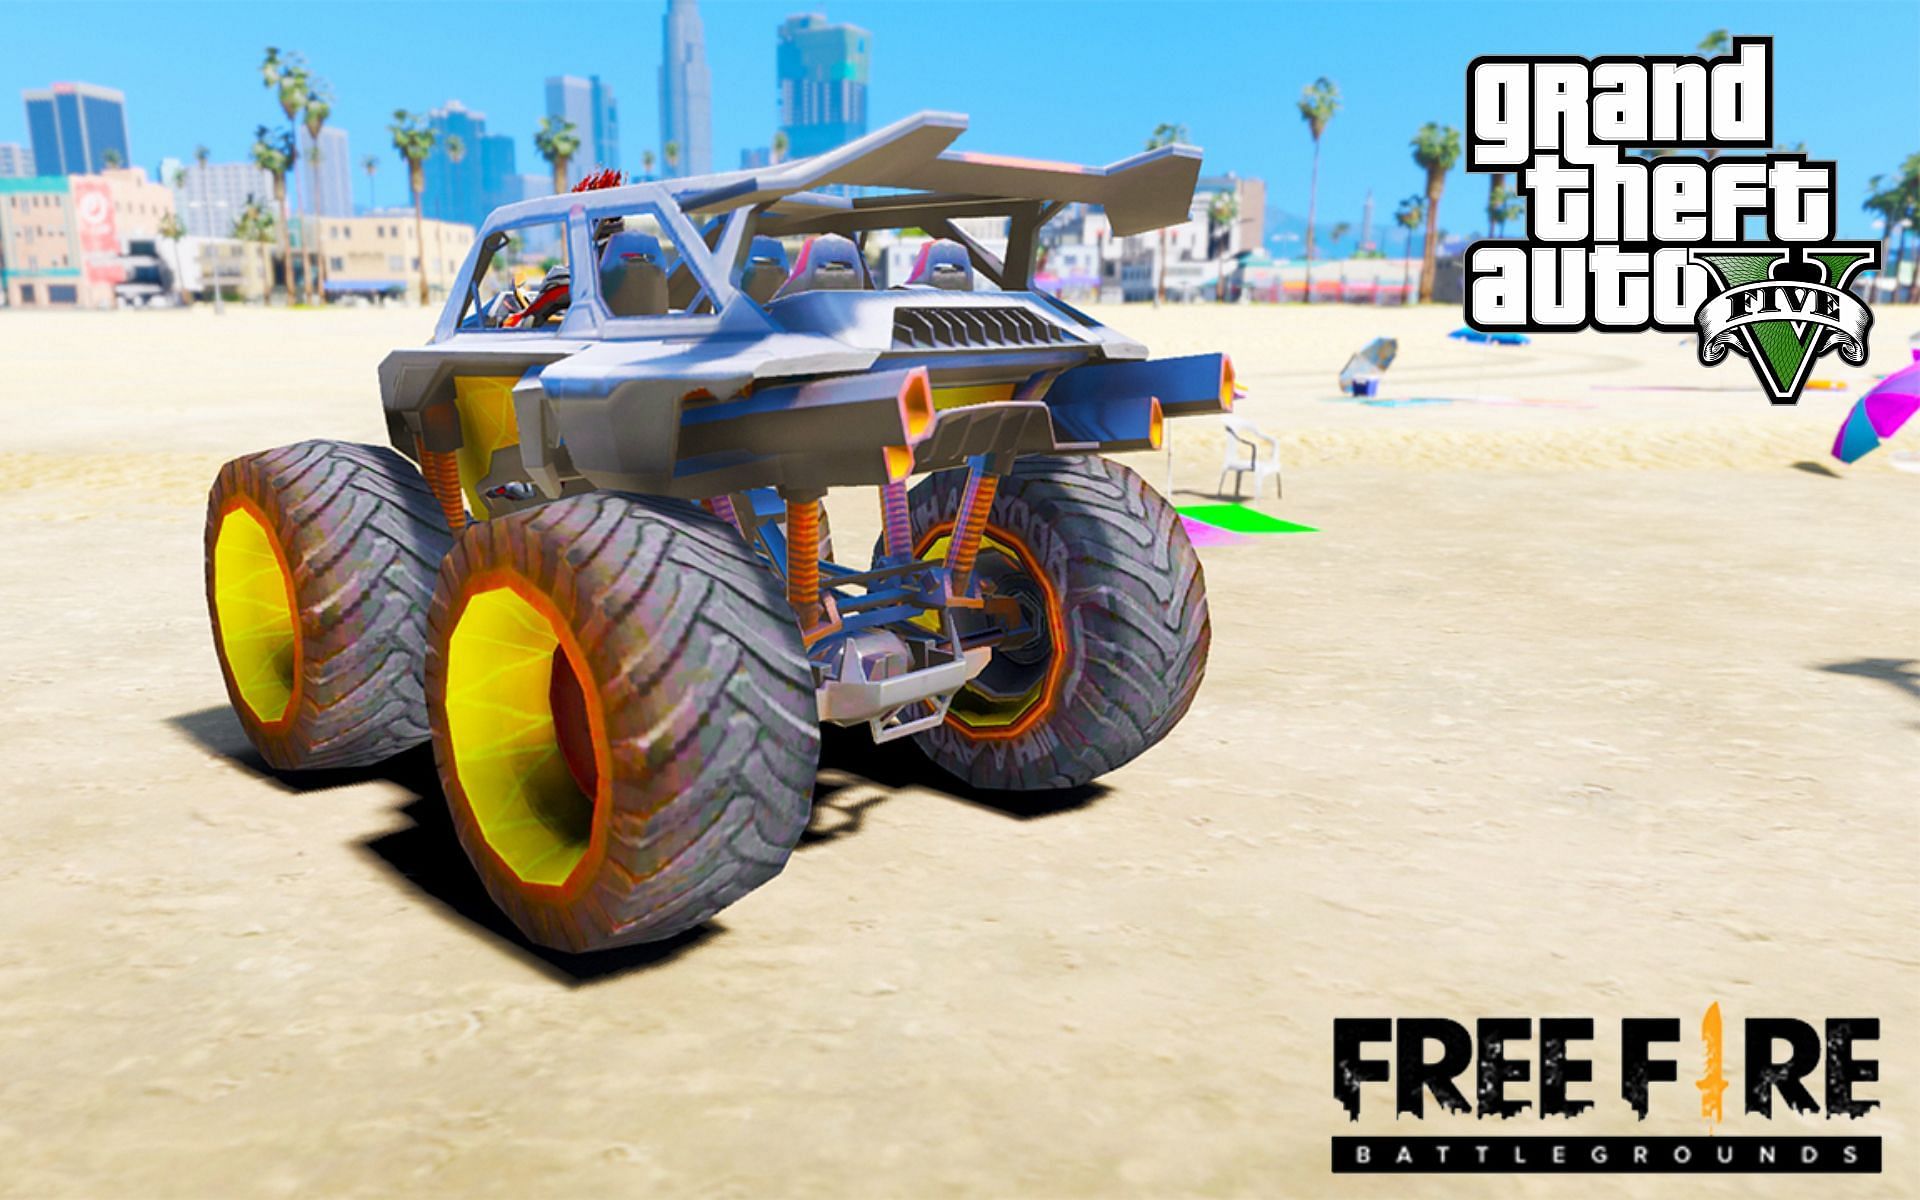 A vehicle from Free Fire, now in Grand Theft Auto 5 (Image via GTA5MODAZ.com)